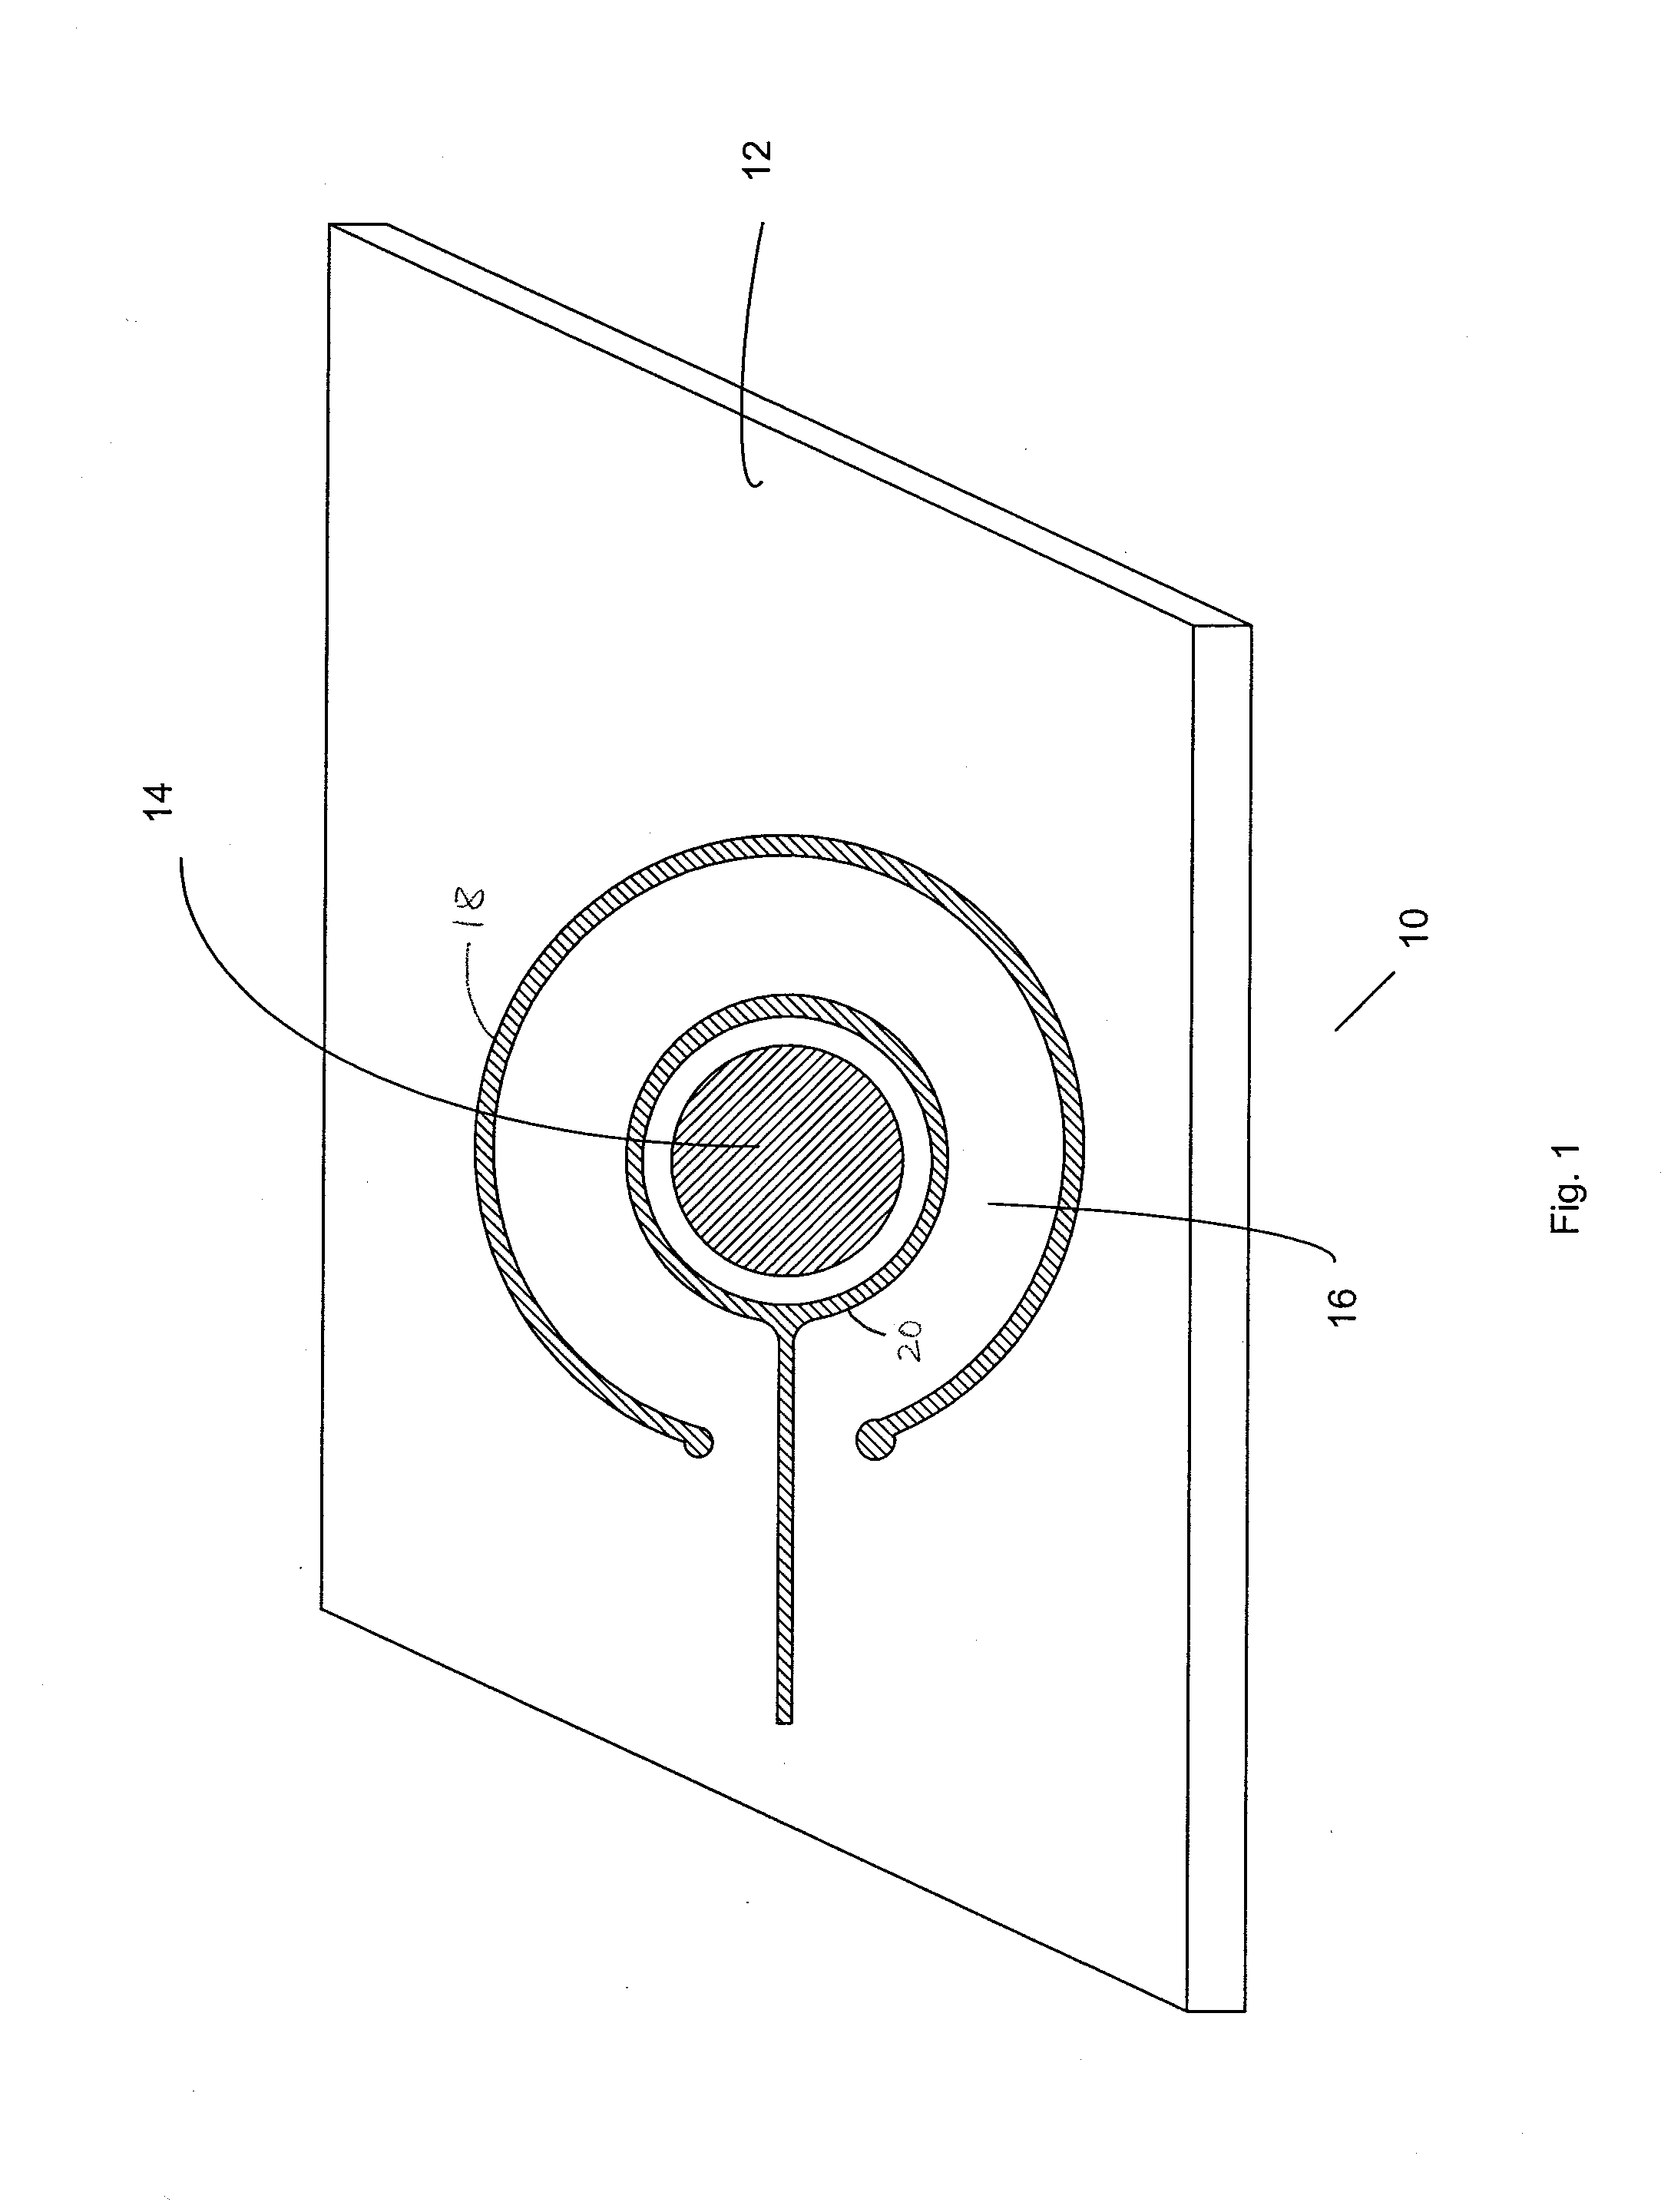 High speed piezoelectric optical system with tunable focal length